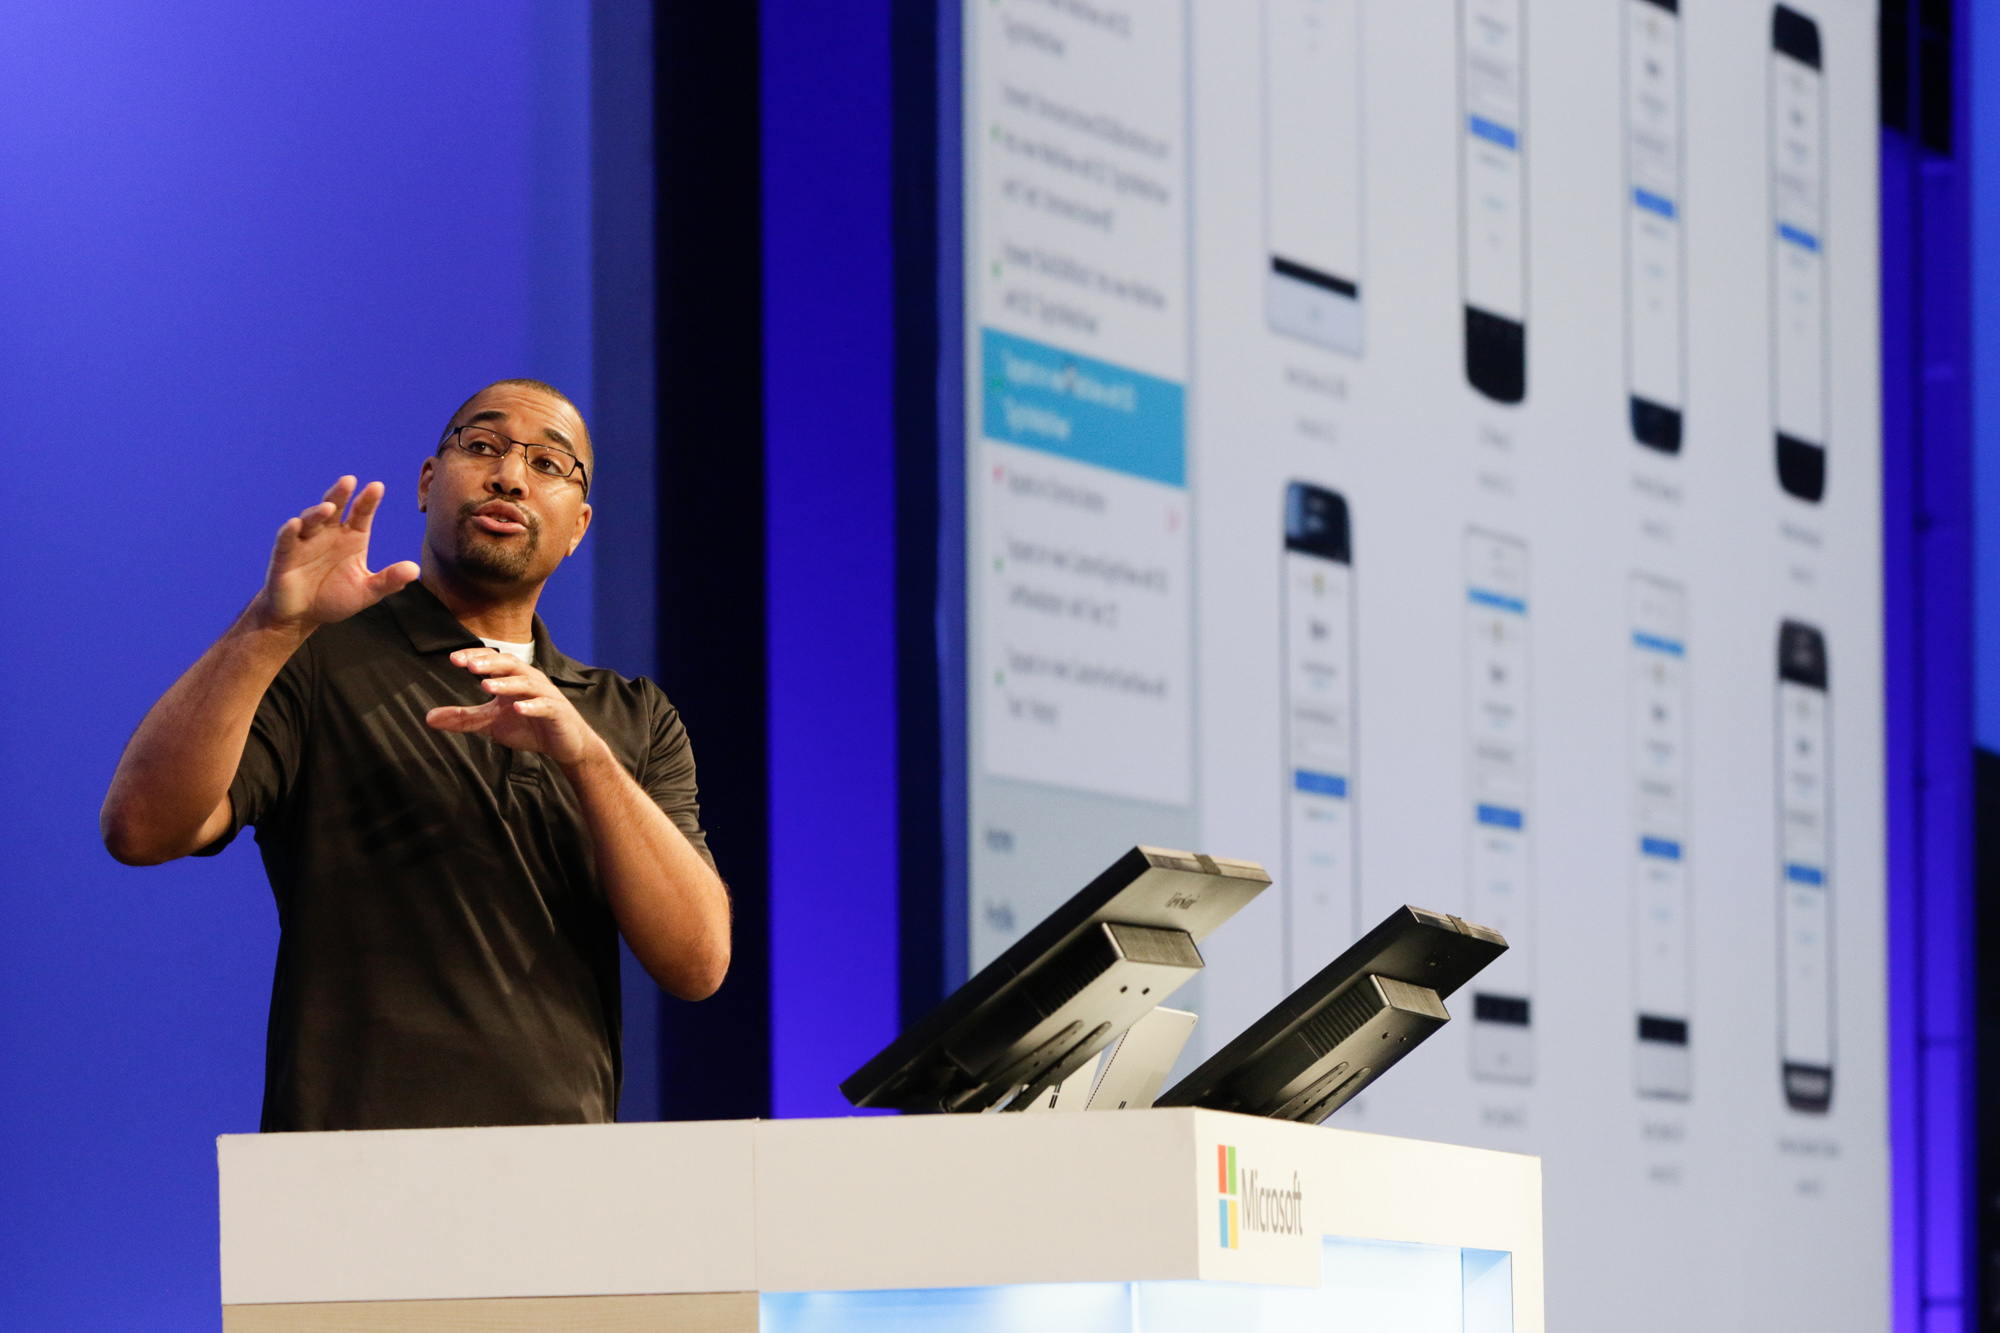 Donovan Brown speaks on stage at Microsoft's Build 2016 conference